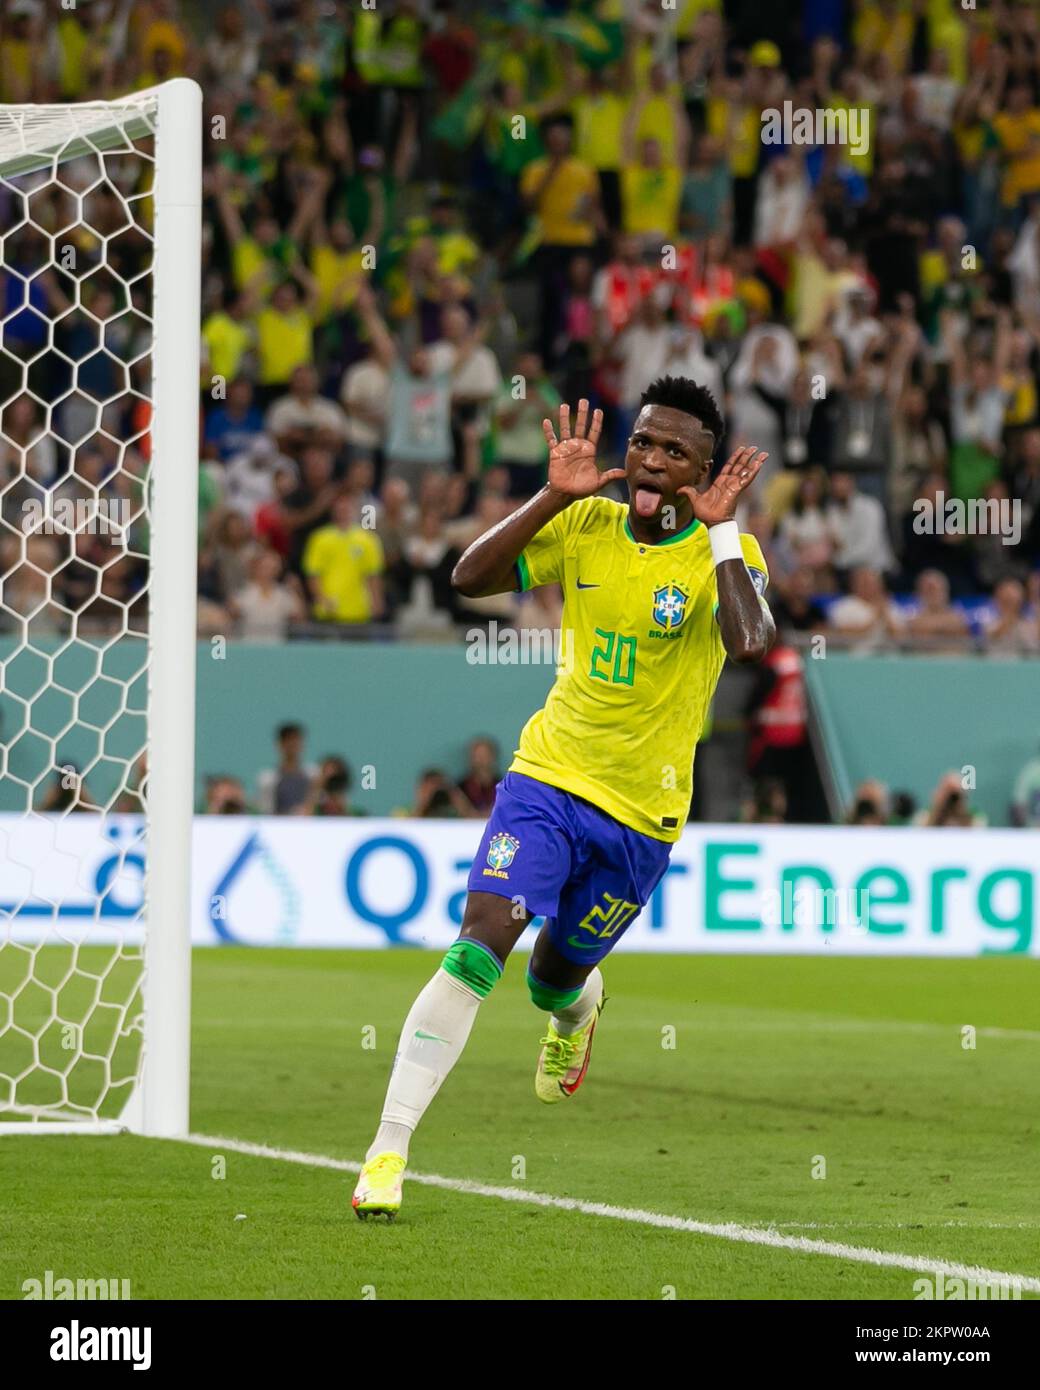 DOHA, QATAR - NOVEMBER 28: Player of Brazil Vinícius Júnior celebrates after scoring a disallowed goal during the FIFA World Cup Qatar 2022 group G match between Brazil and Switzerland at Stadium 974 on November 28, 2022 in Doha, Qatar. (Photo by Florencia Tan Jun/PxImages) Stock Photo